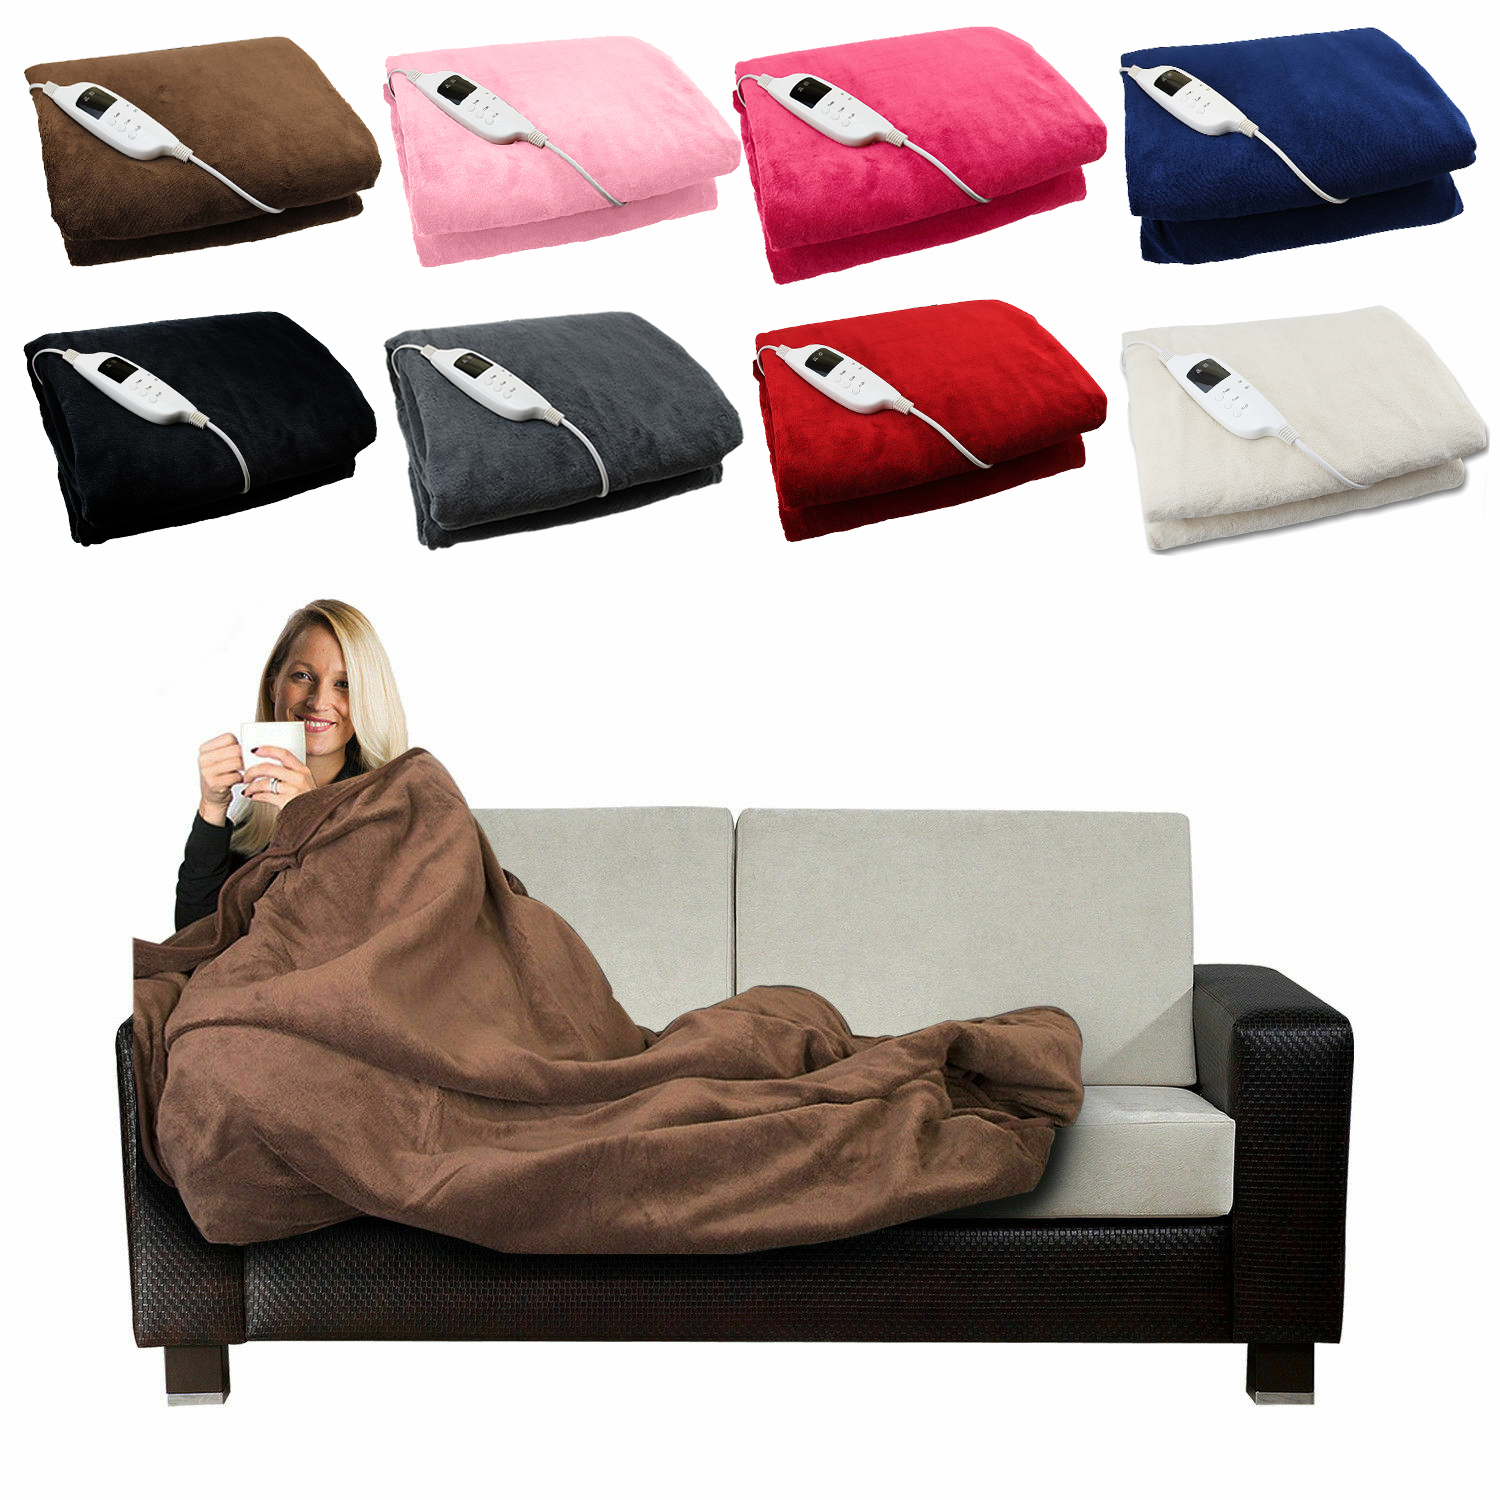 Heated Electric Throw Over Blanket